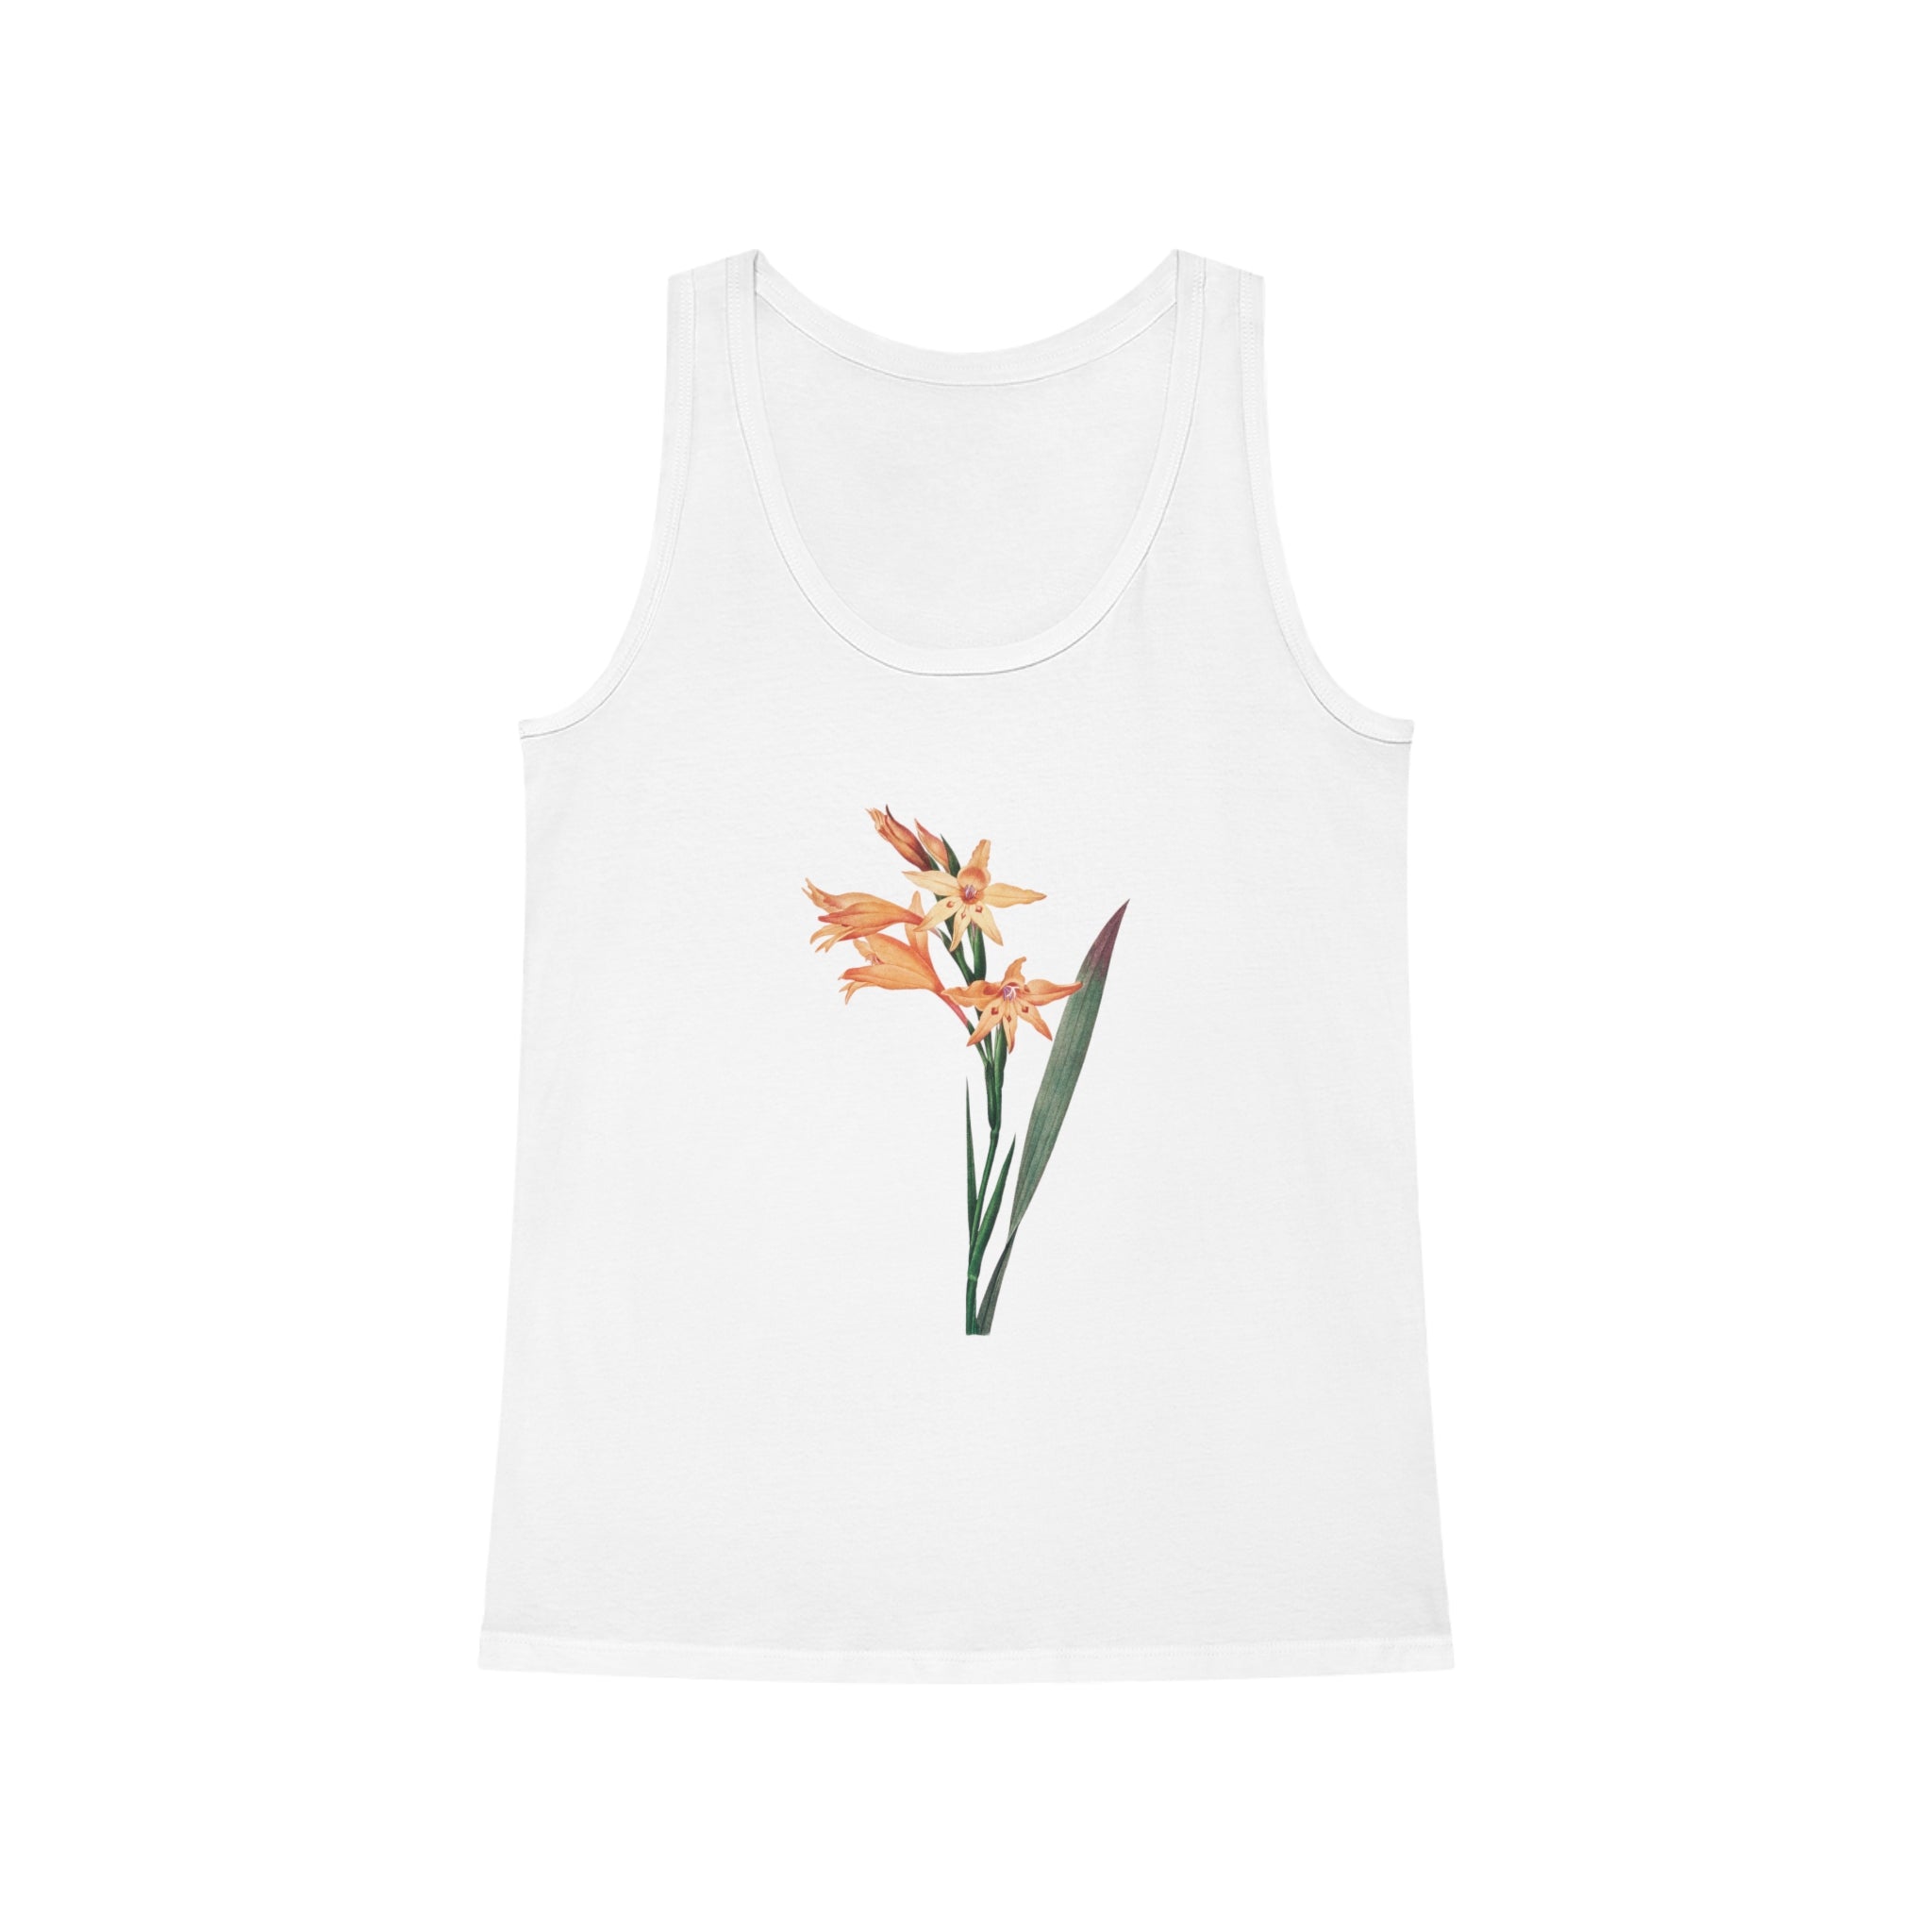 A lightweight women's Flowers Tank Top with orange flowers on it made from breathable organic cotton.